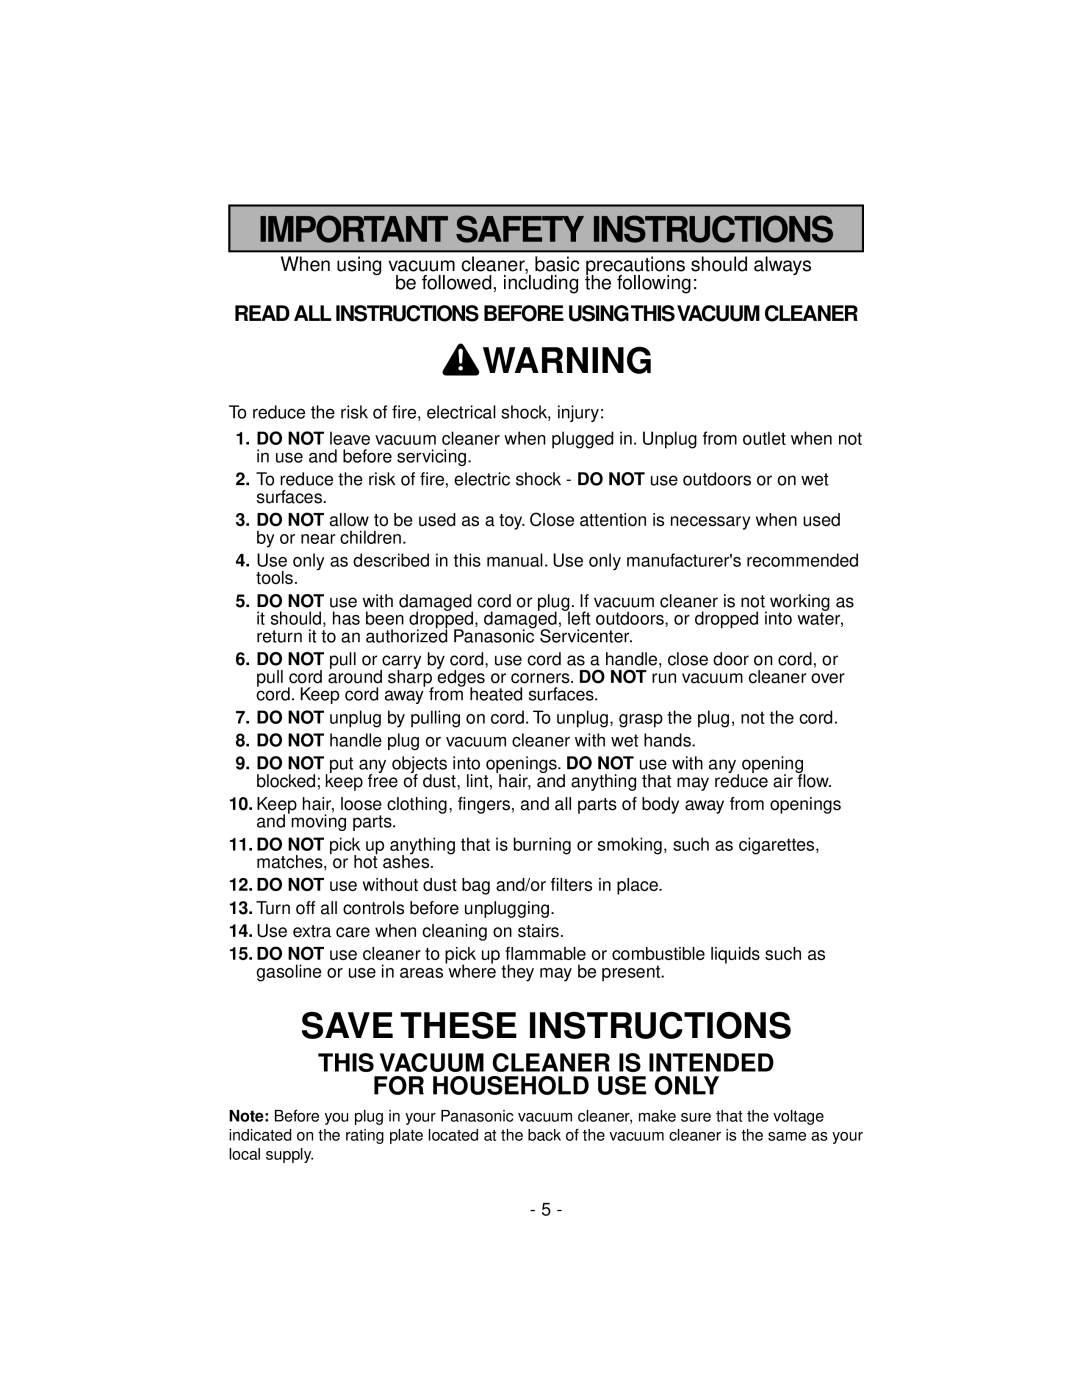 Panasonic MC-V7319 Important Safety Instructions, Save These Instructions, be followed, including the following 